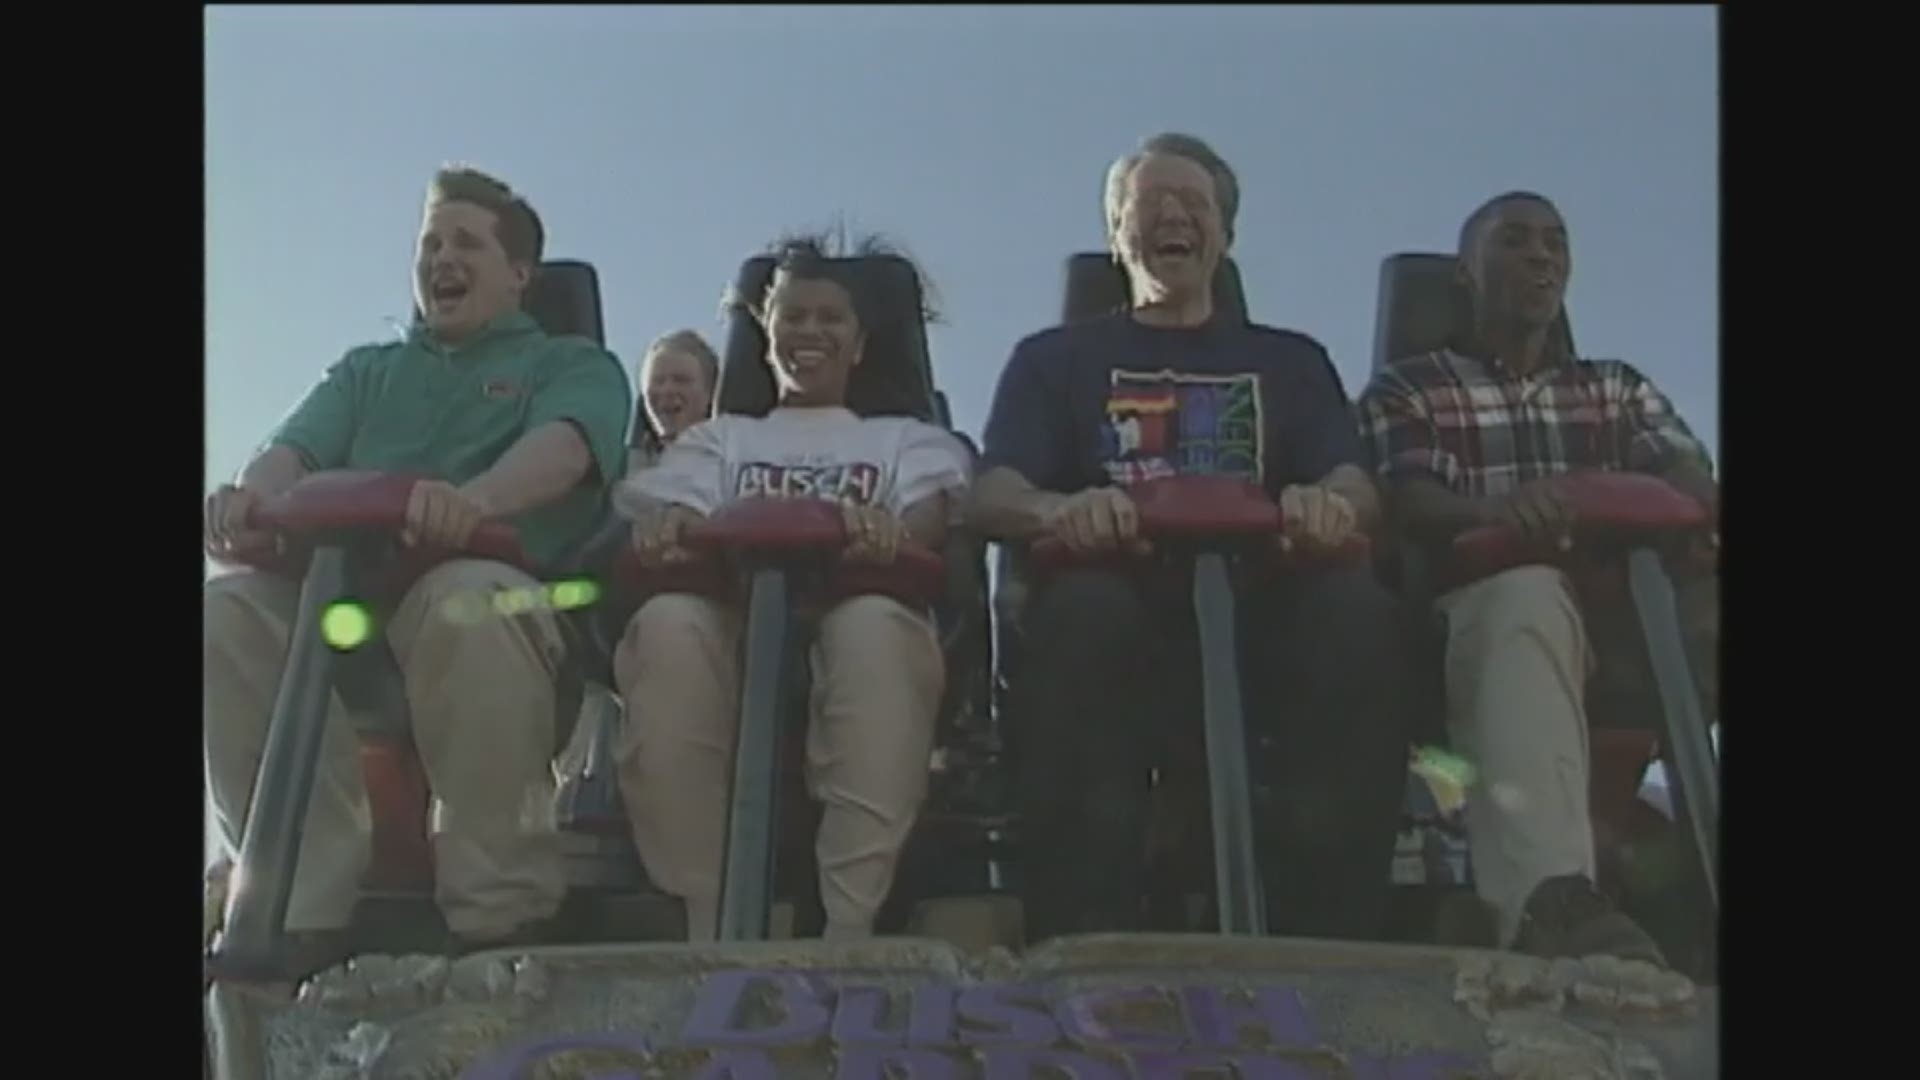 13News Now reporter Joe Flanagan experiences Apollo's Chariot for the first time at Busch Gardens as the ride opened to the public in 1999.